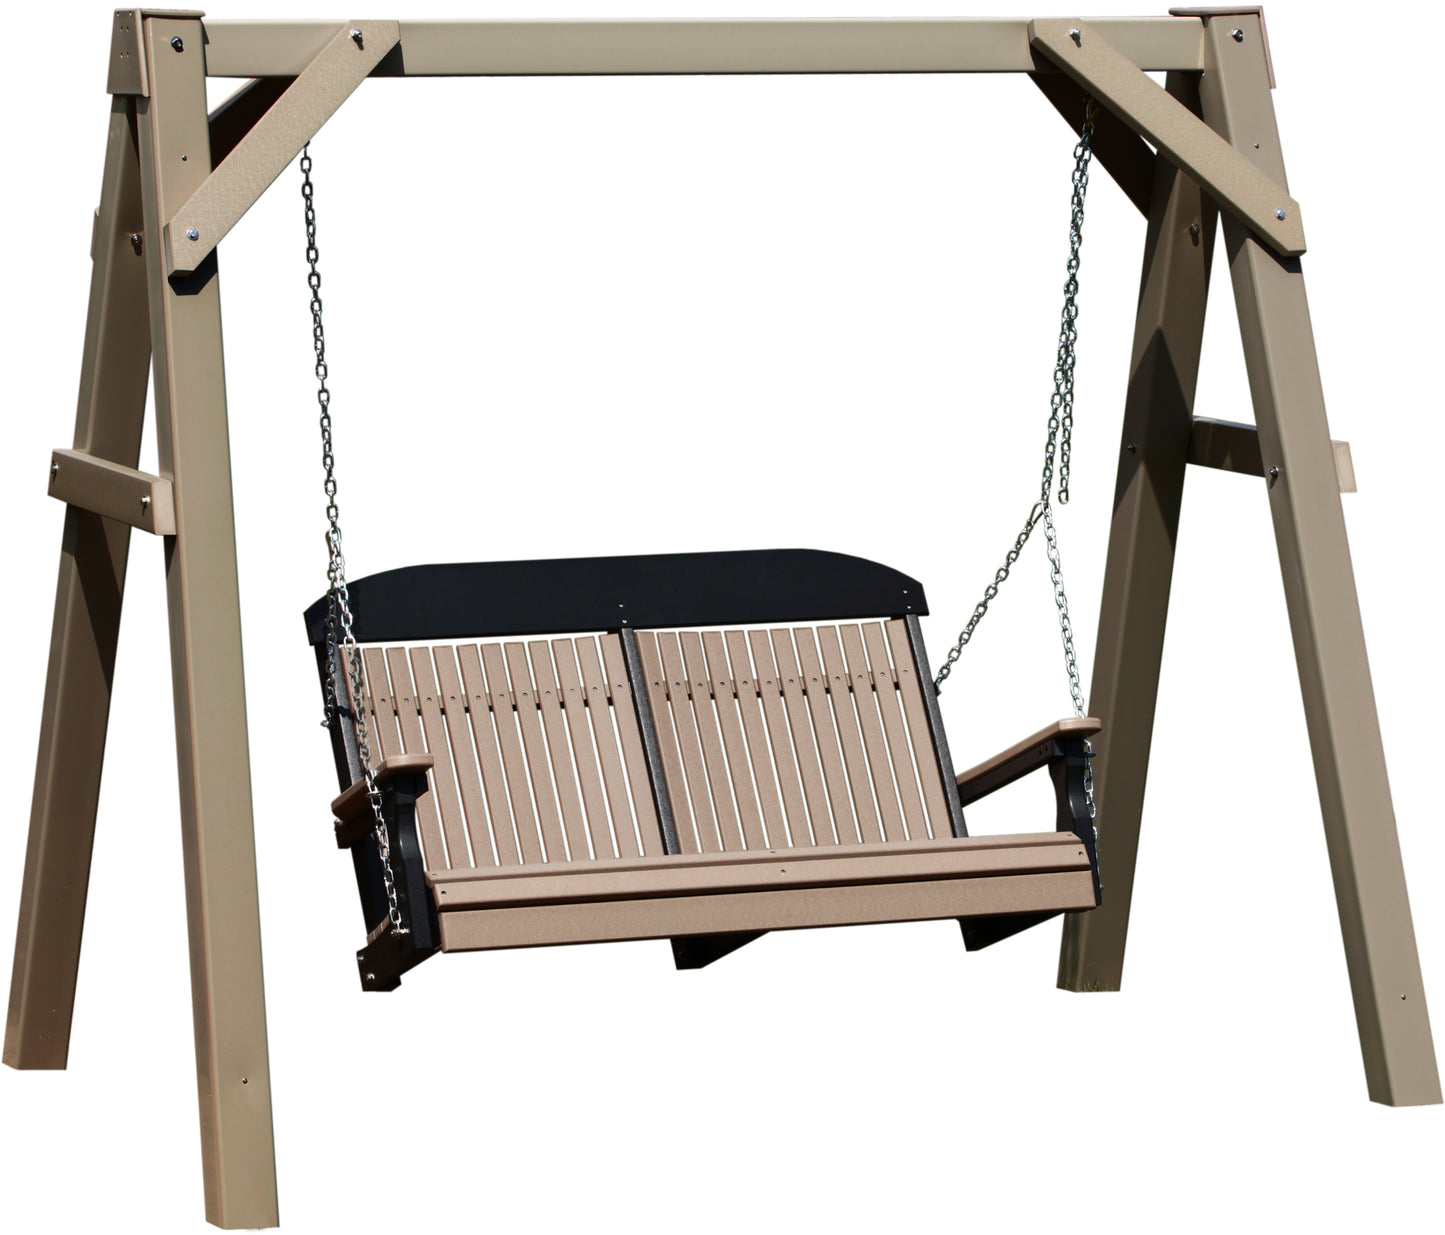 LuxCraft A-Frame Vinyl Swing Stand - with swing attached in clay